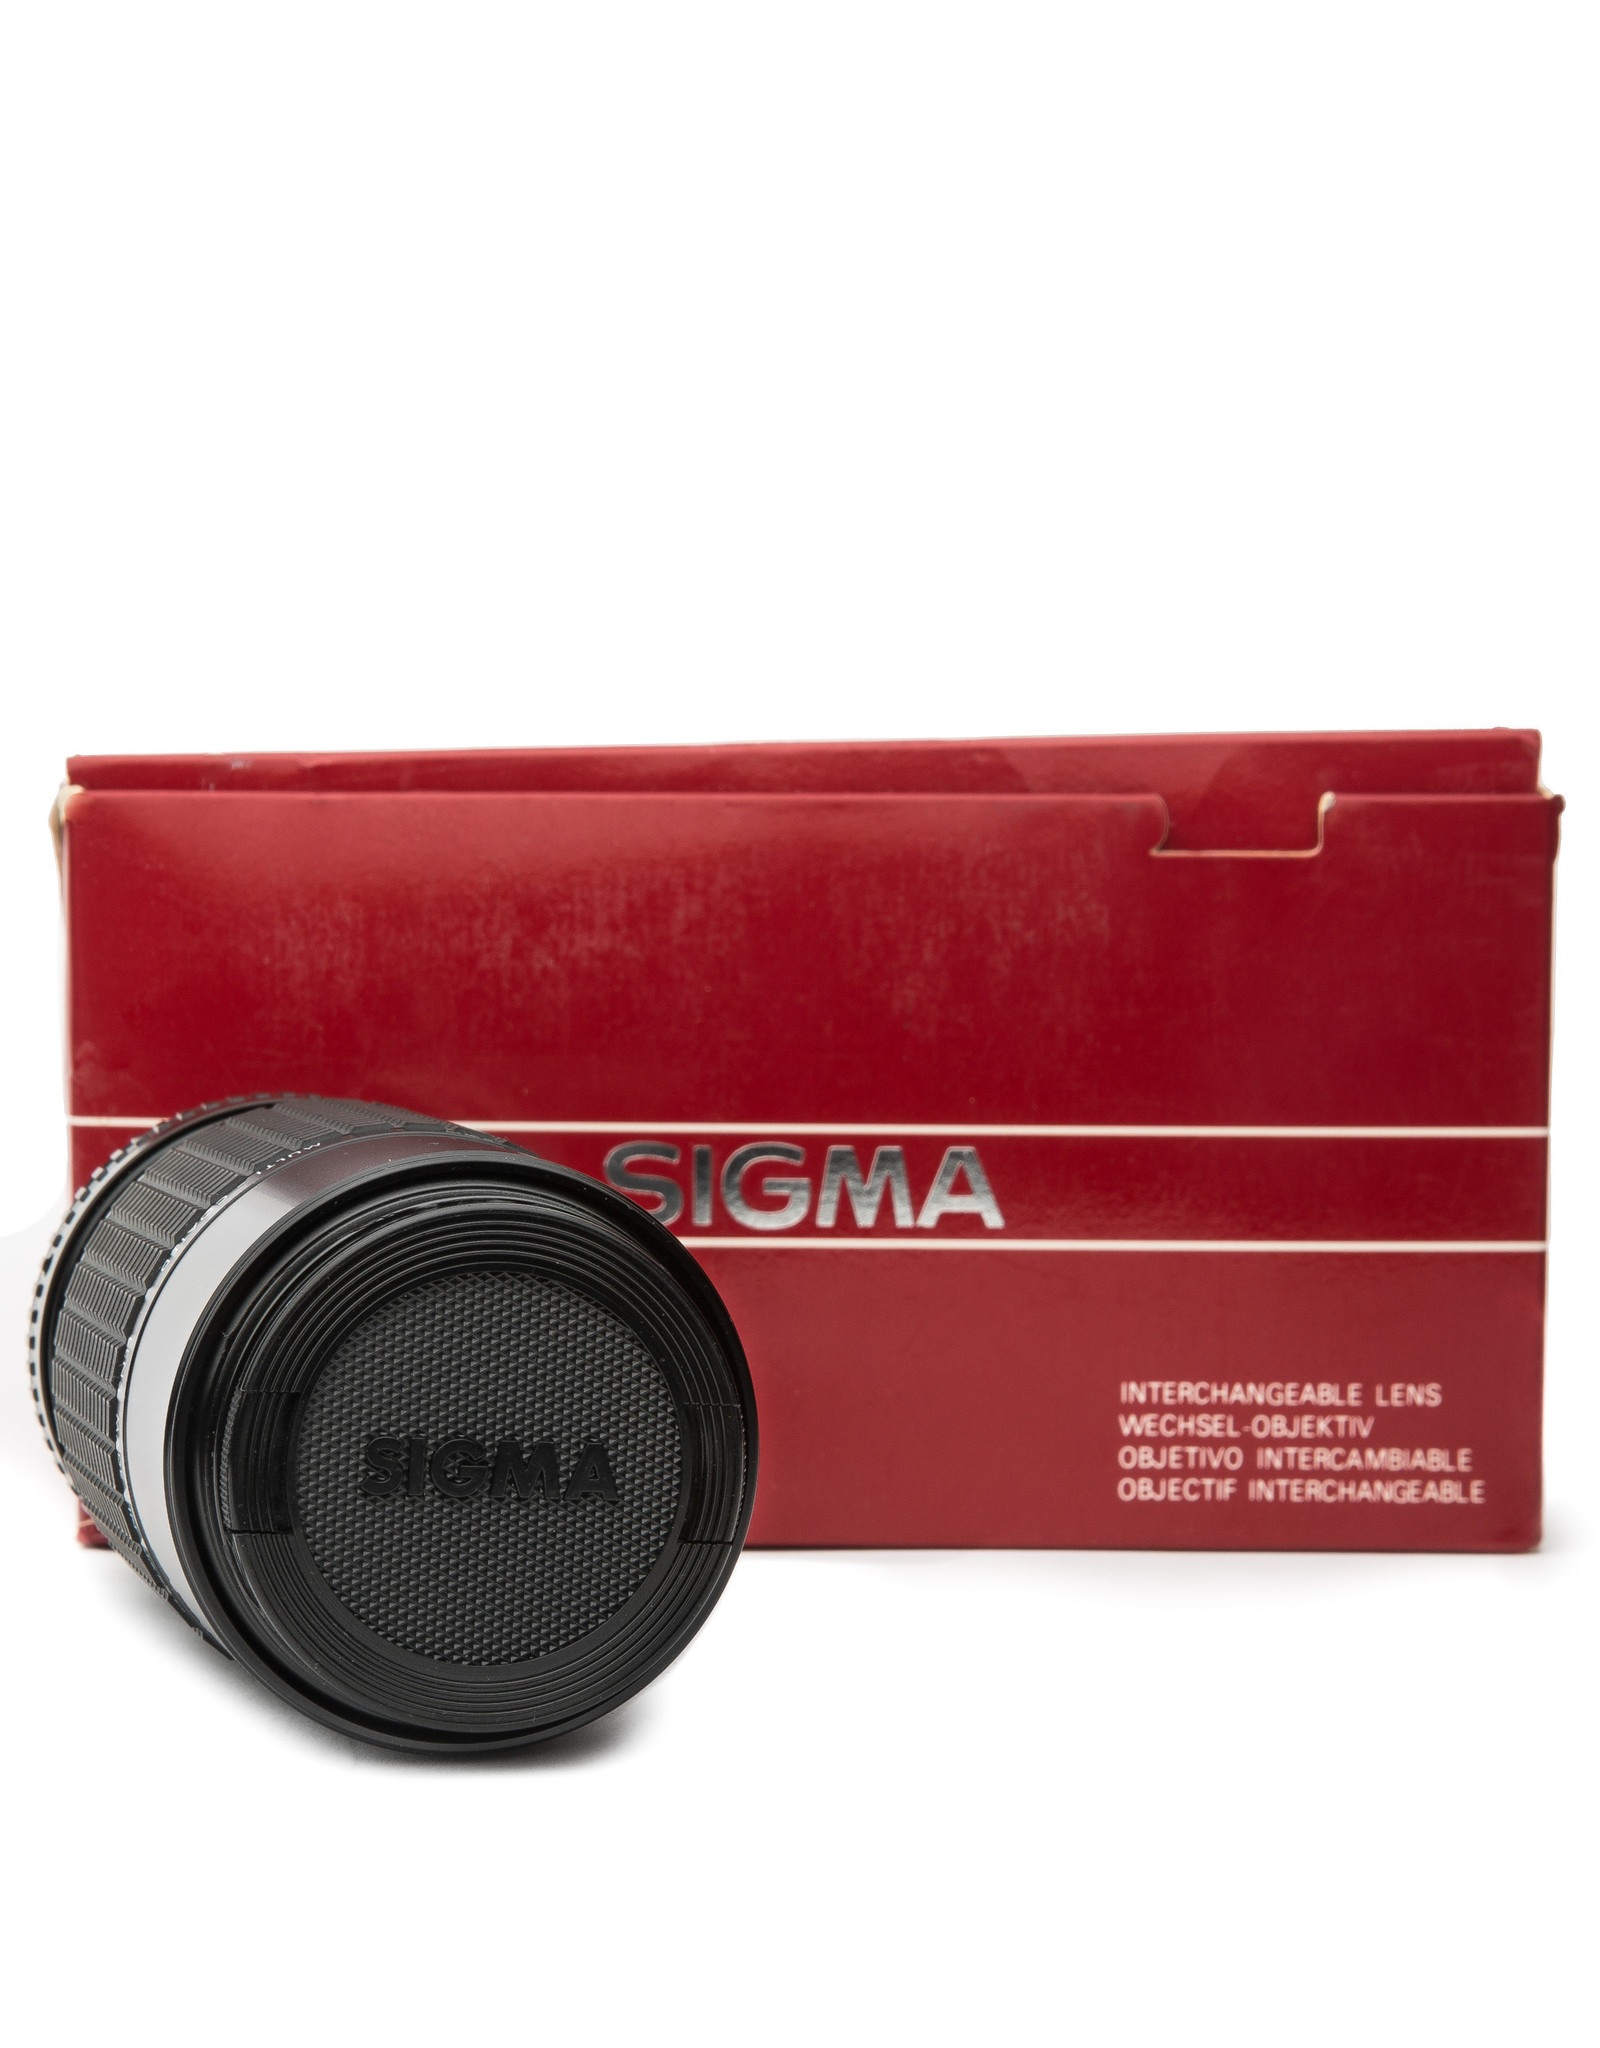 Sigma Sigma 70-210mm f/3.5-4.5 Zoom Lens For Pentax K